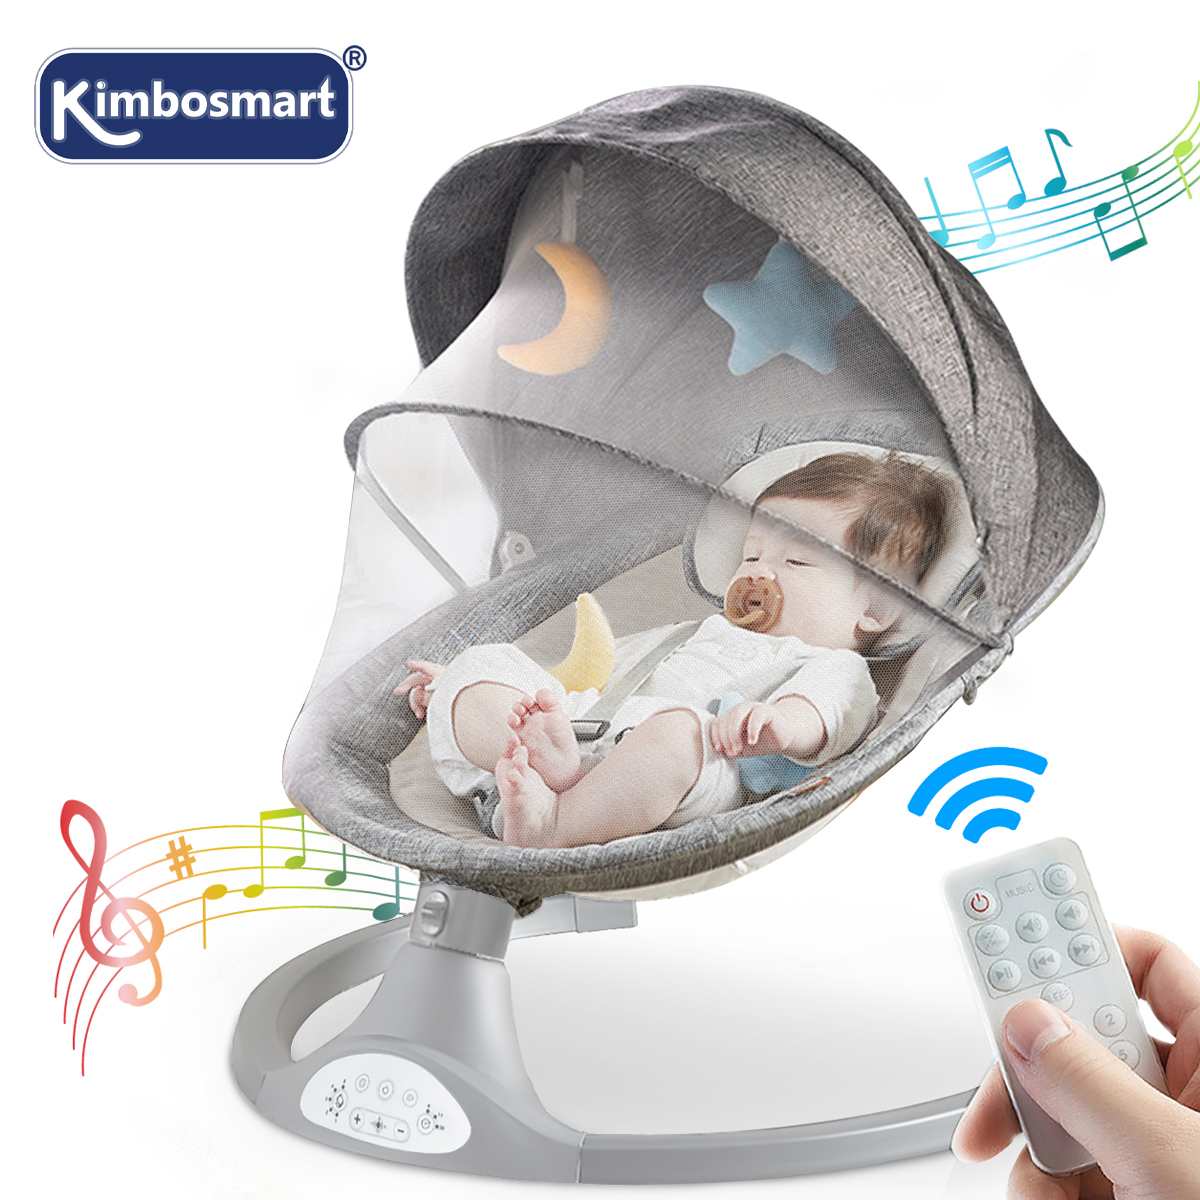 Baby Rocking Chairs for Baby Electric Baby Swing Breastfeeding Rocking Chair Multifunction Cradle Baby Lounger bluetooth Music